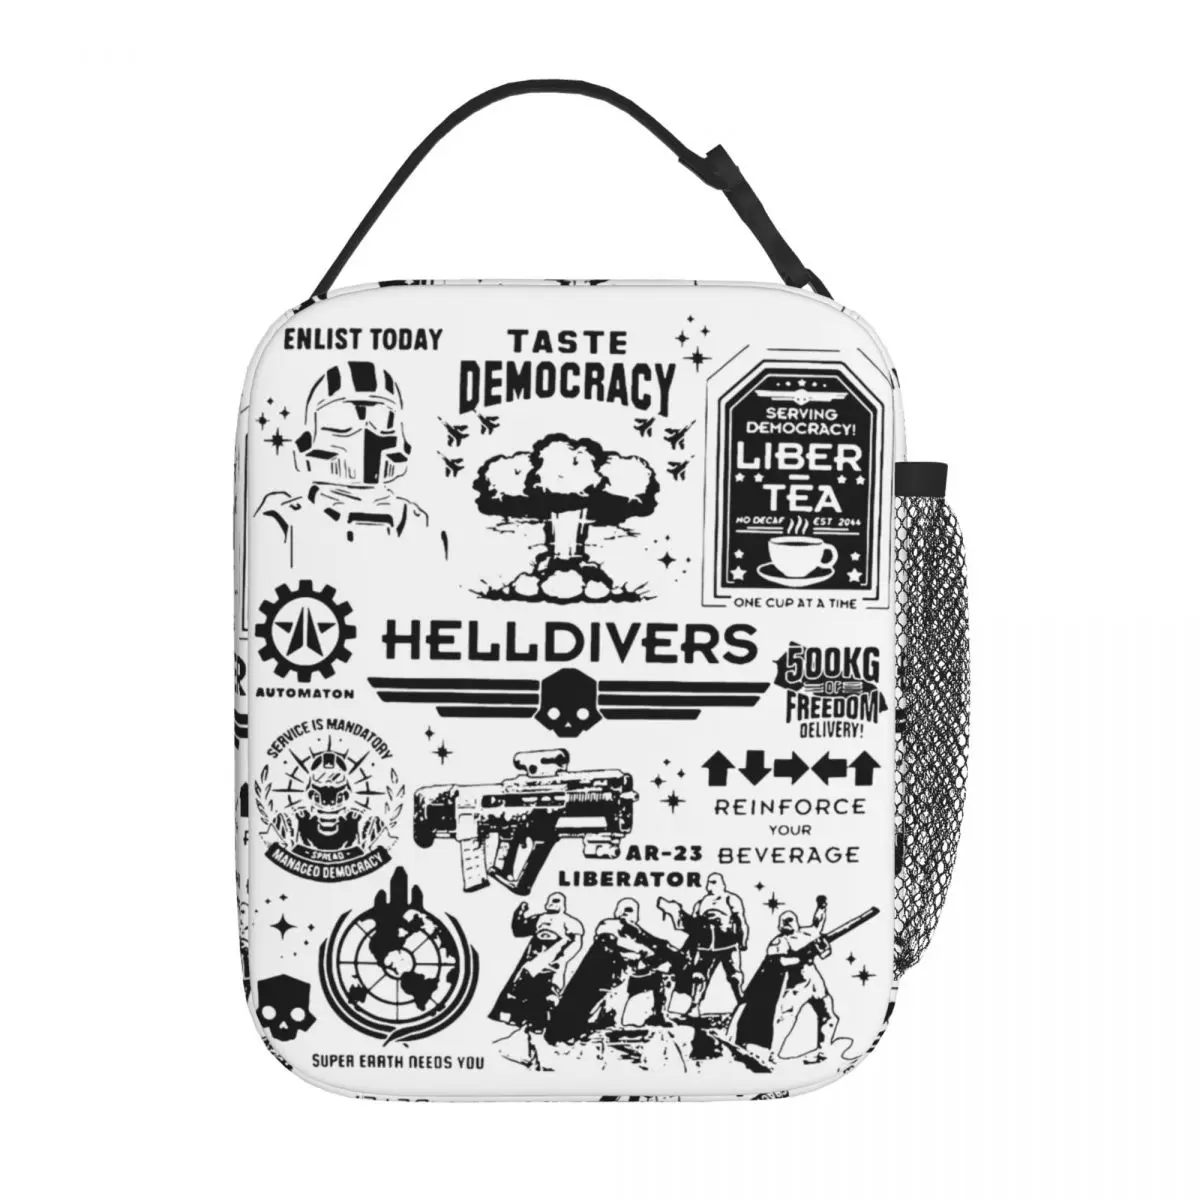 

Helldivers 2 Full Merch Insulated Lunch Bag For Travel Video game Food Storage Bag Portable Thermal Cooler Bento Box